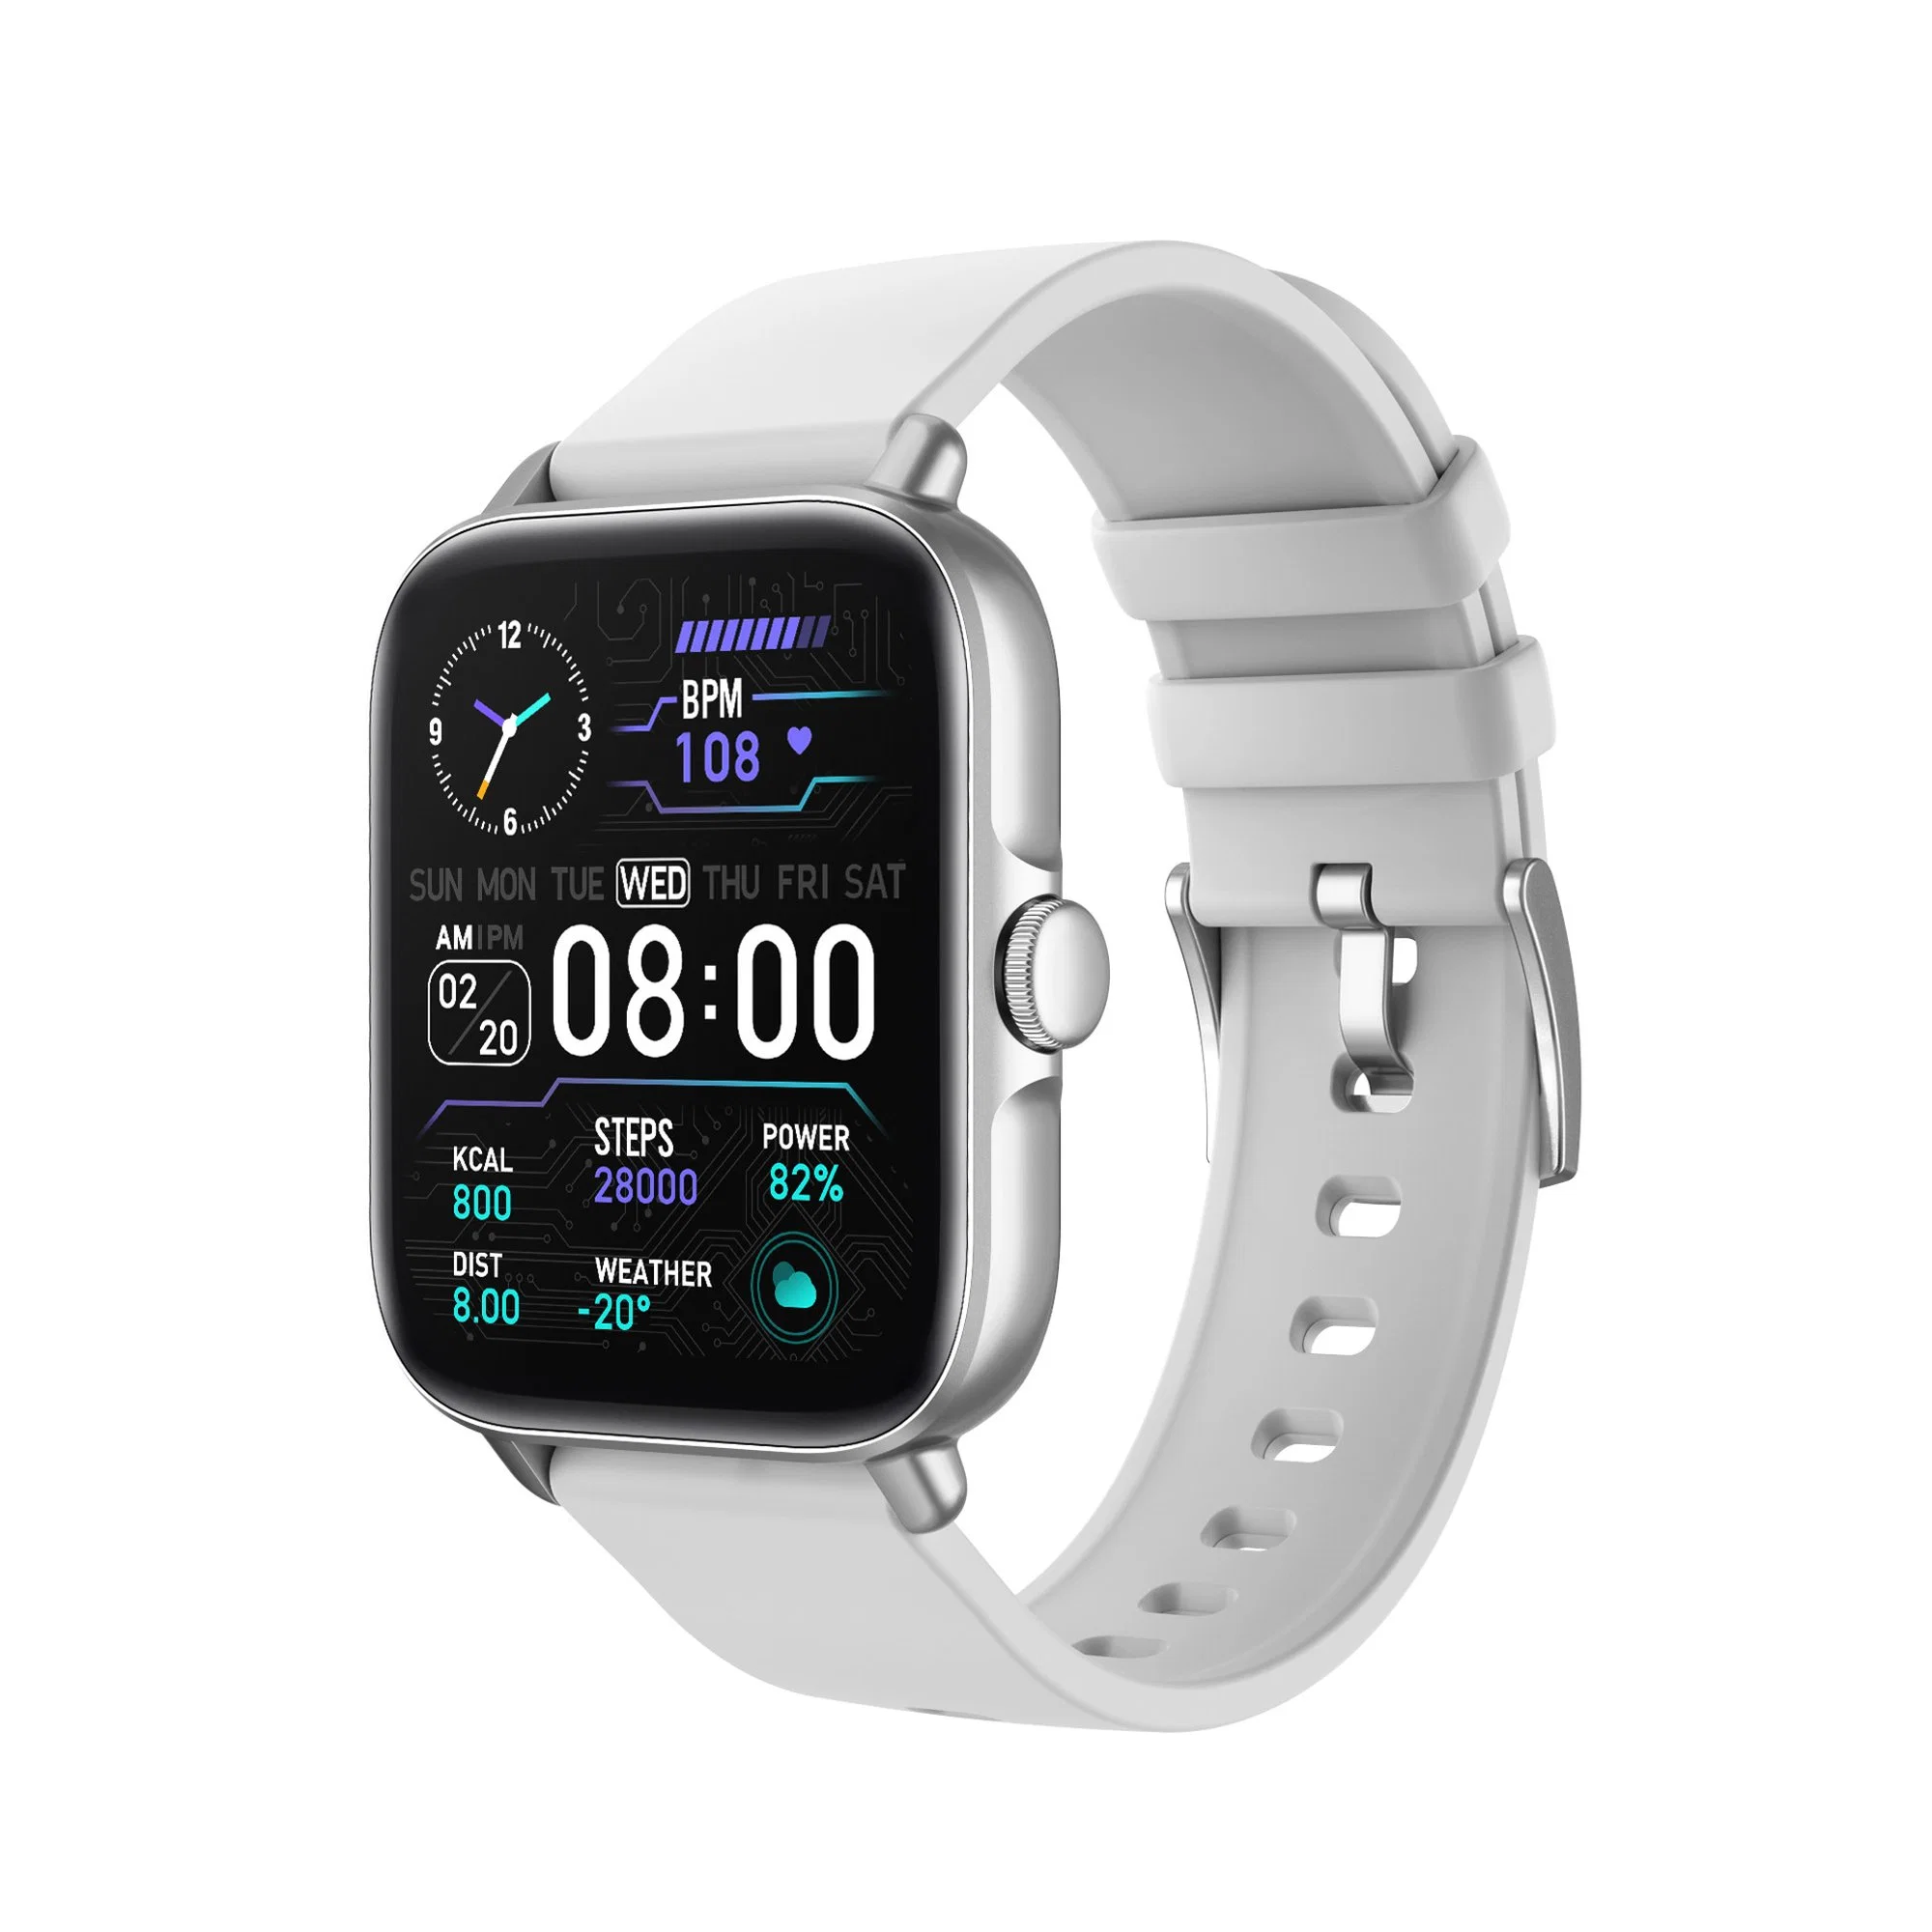 Call Receive Dial Full Touch Screen Smartwatch for Android and Ios Phones Smart Watch